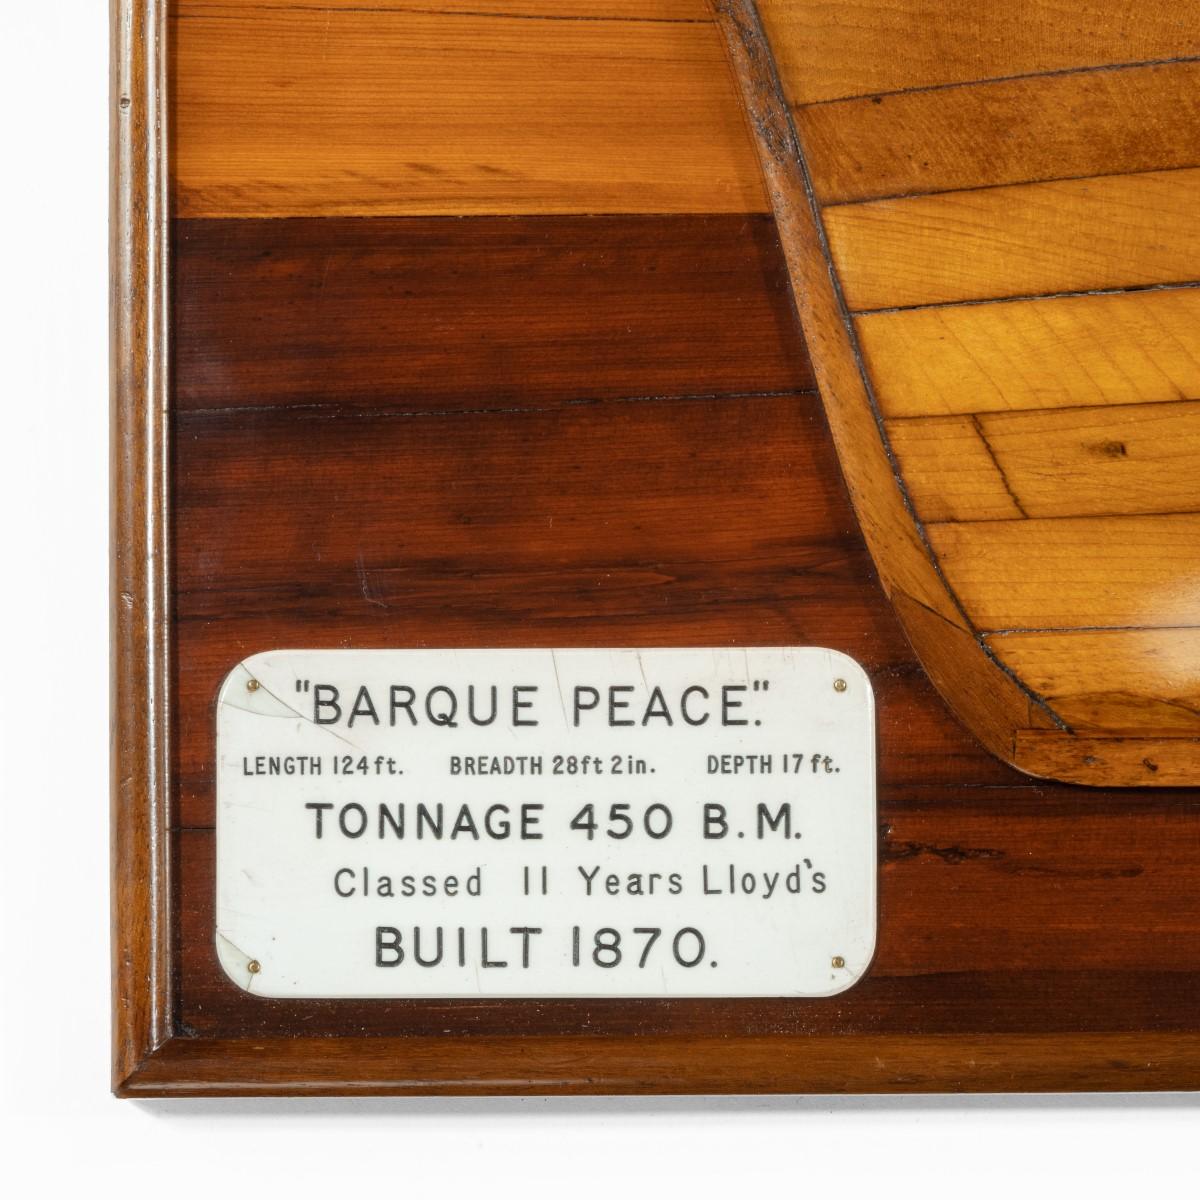 A fine half hull model of ‘Barque Peace’, the planked hull set on a stained yew wood backboard, with a plaque reading ‘”Barque Peace” Tonnage 450 B.M. Classed II Years Lloyd’s Built 1870.’ British.
   